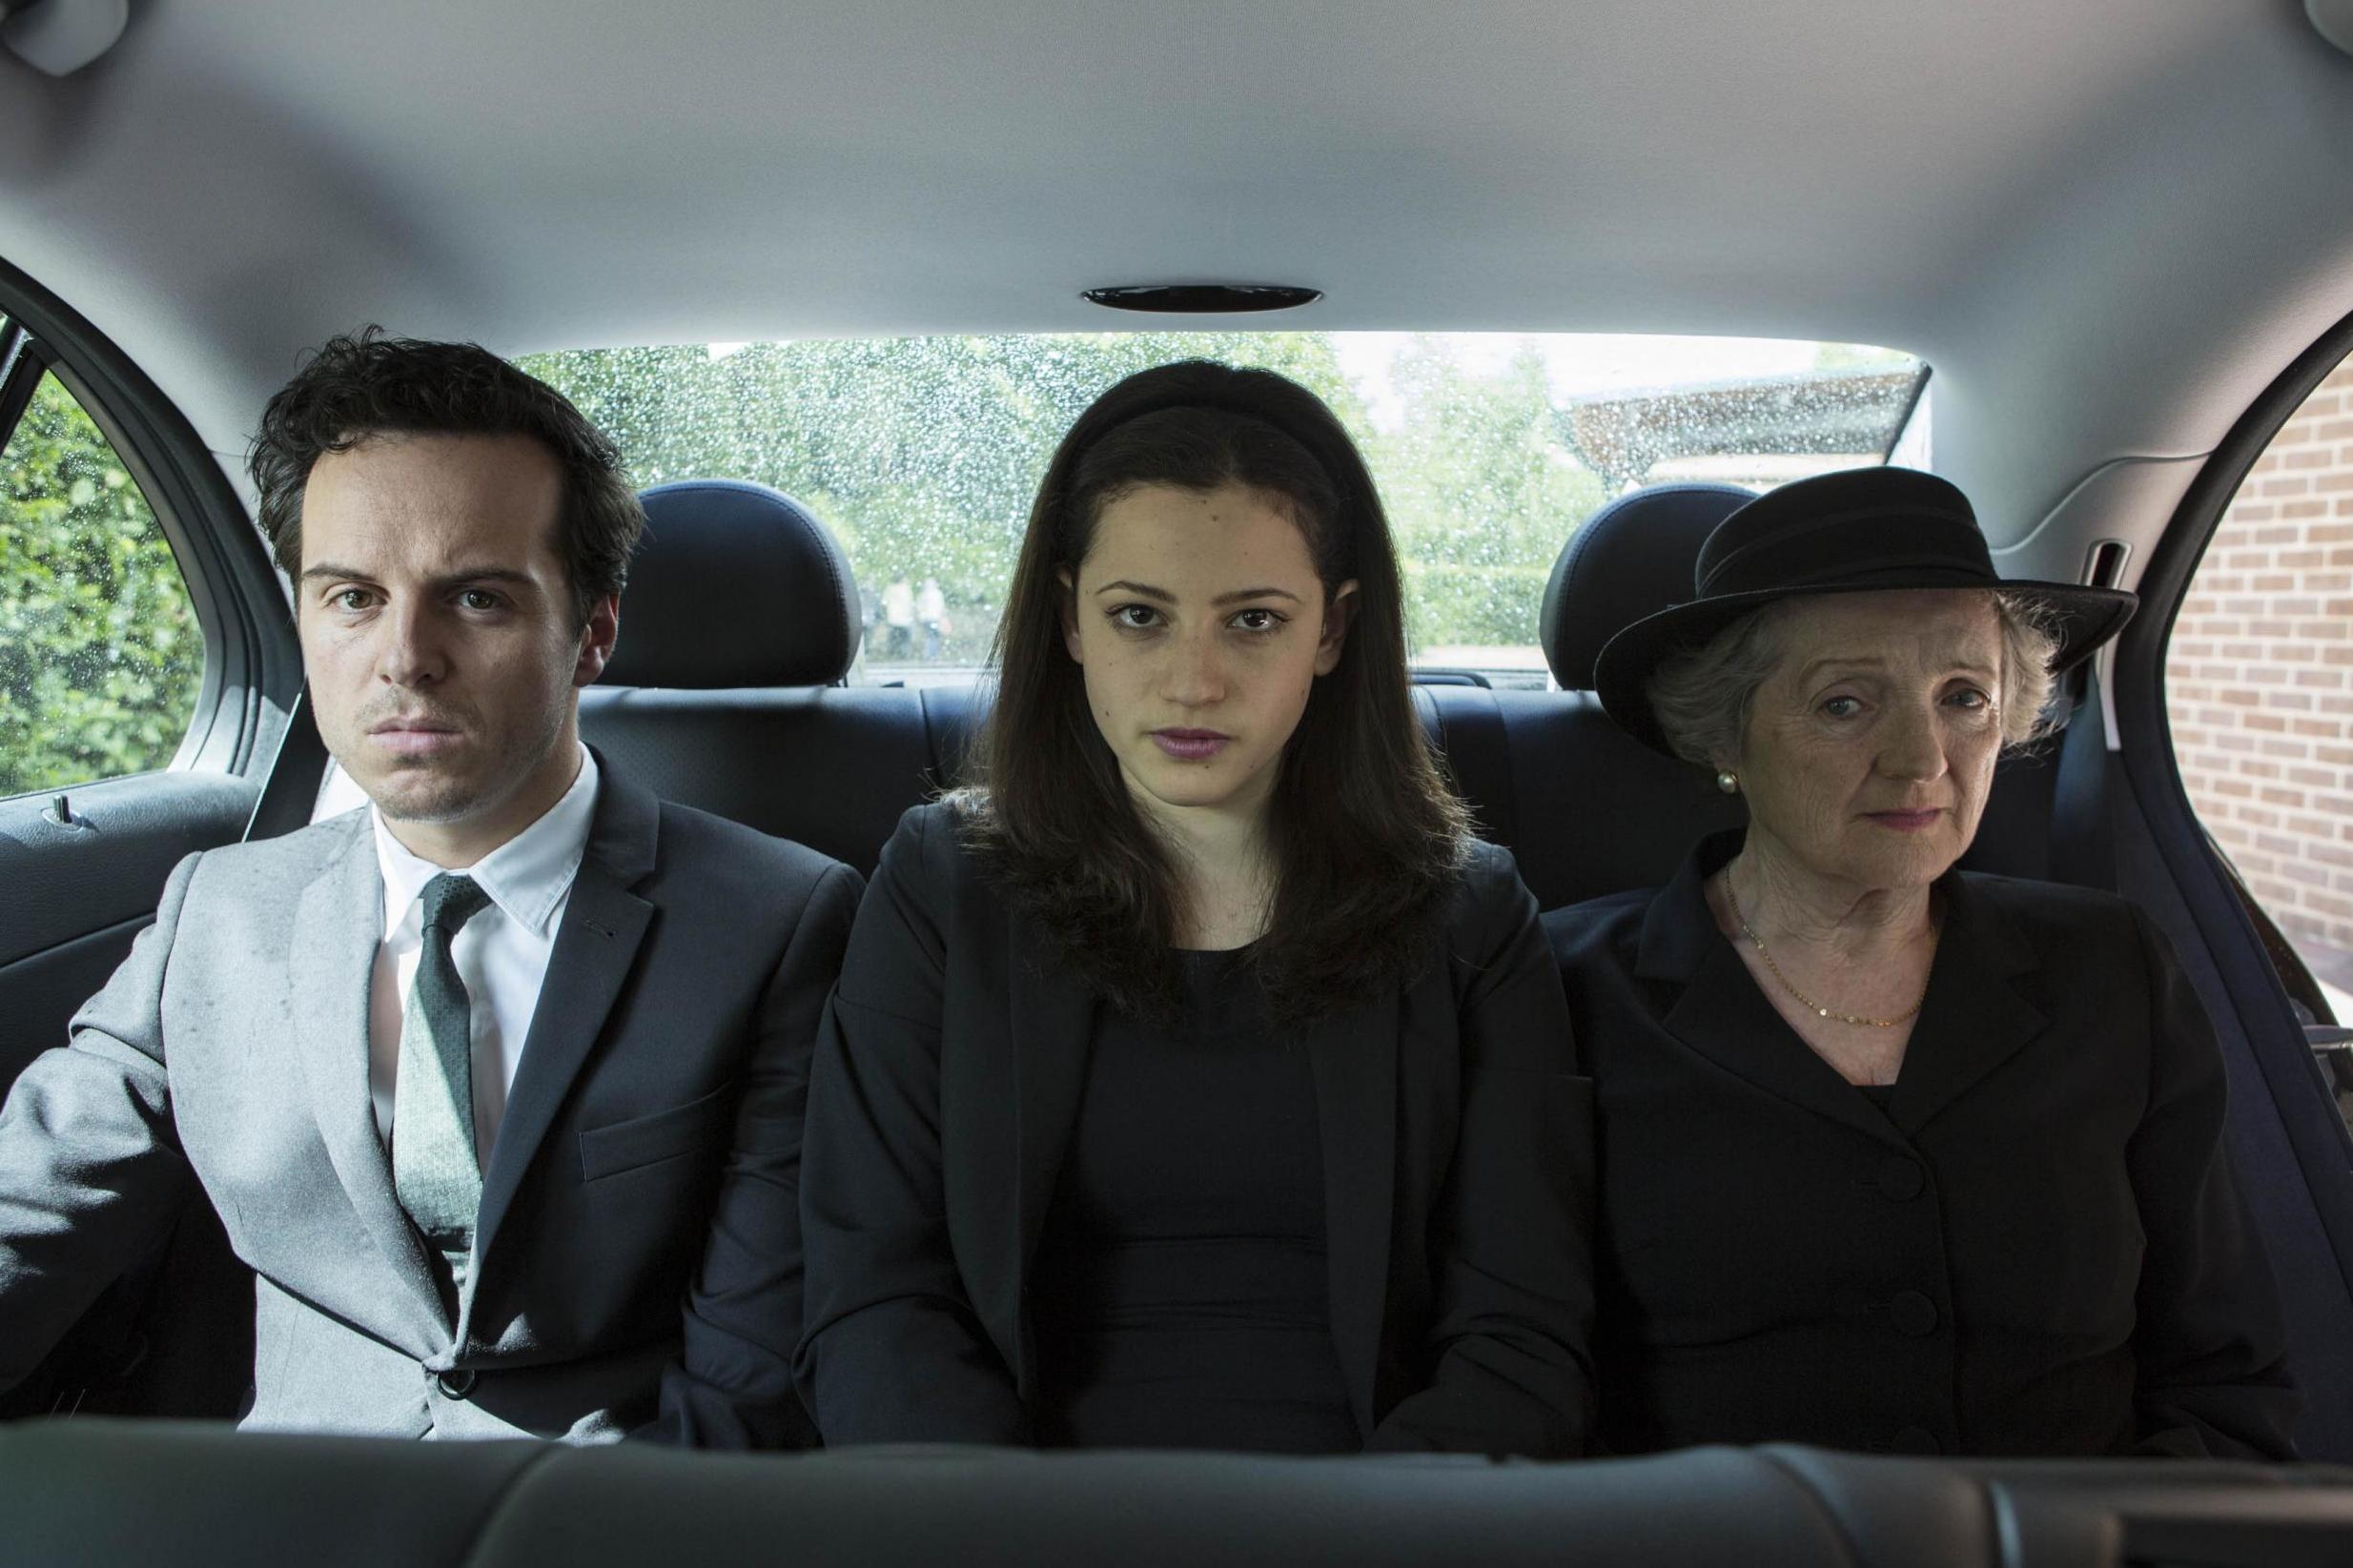 Andrew Scott as Mark, Avigail Tlalim as Jodie and Julia McKenzie as Betty in ITV’s ‘The Town’